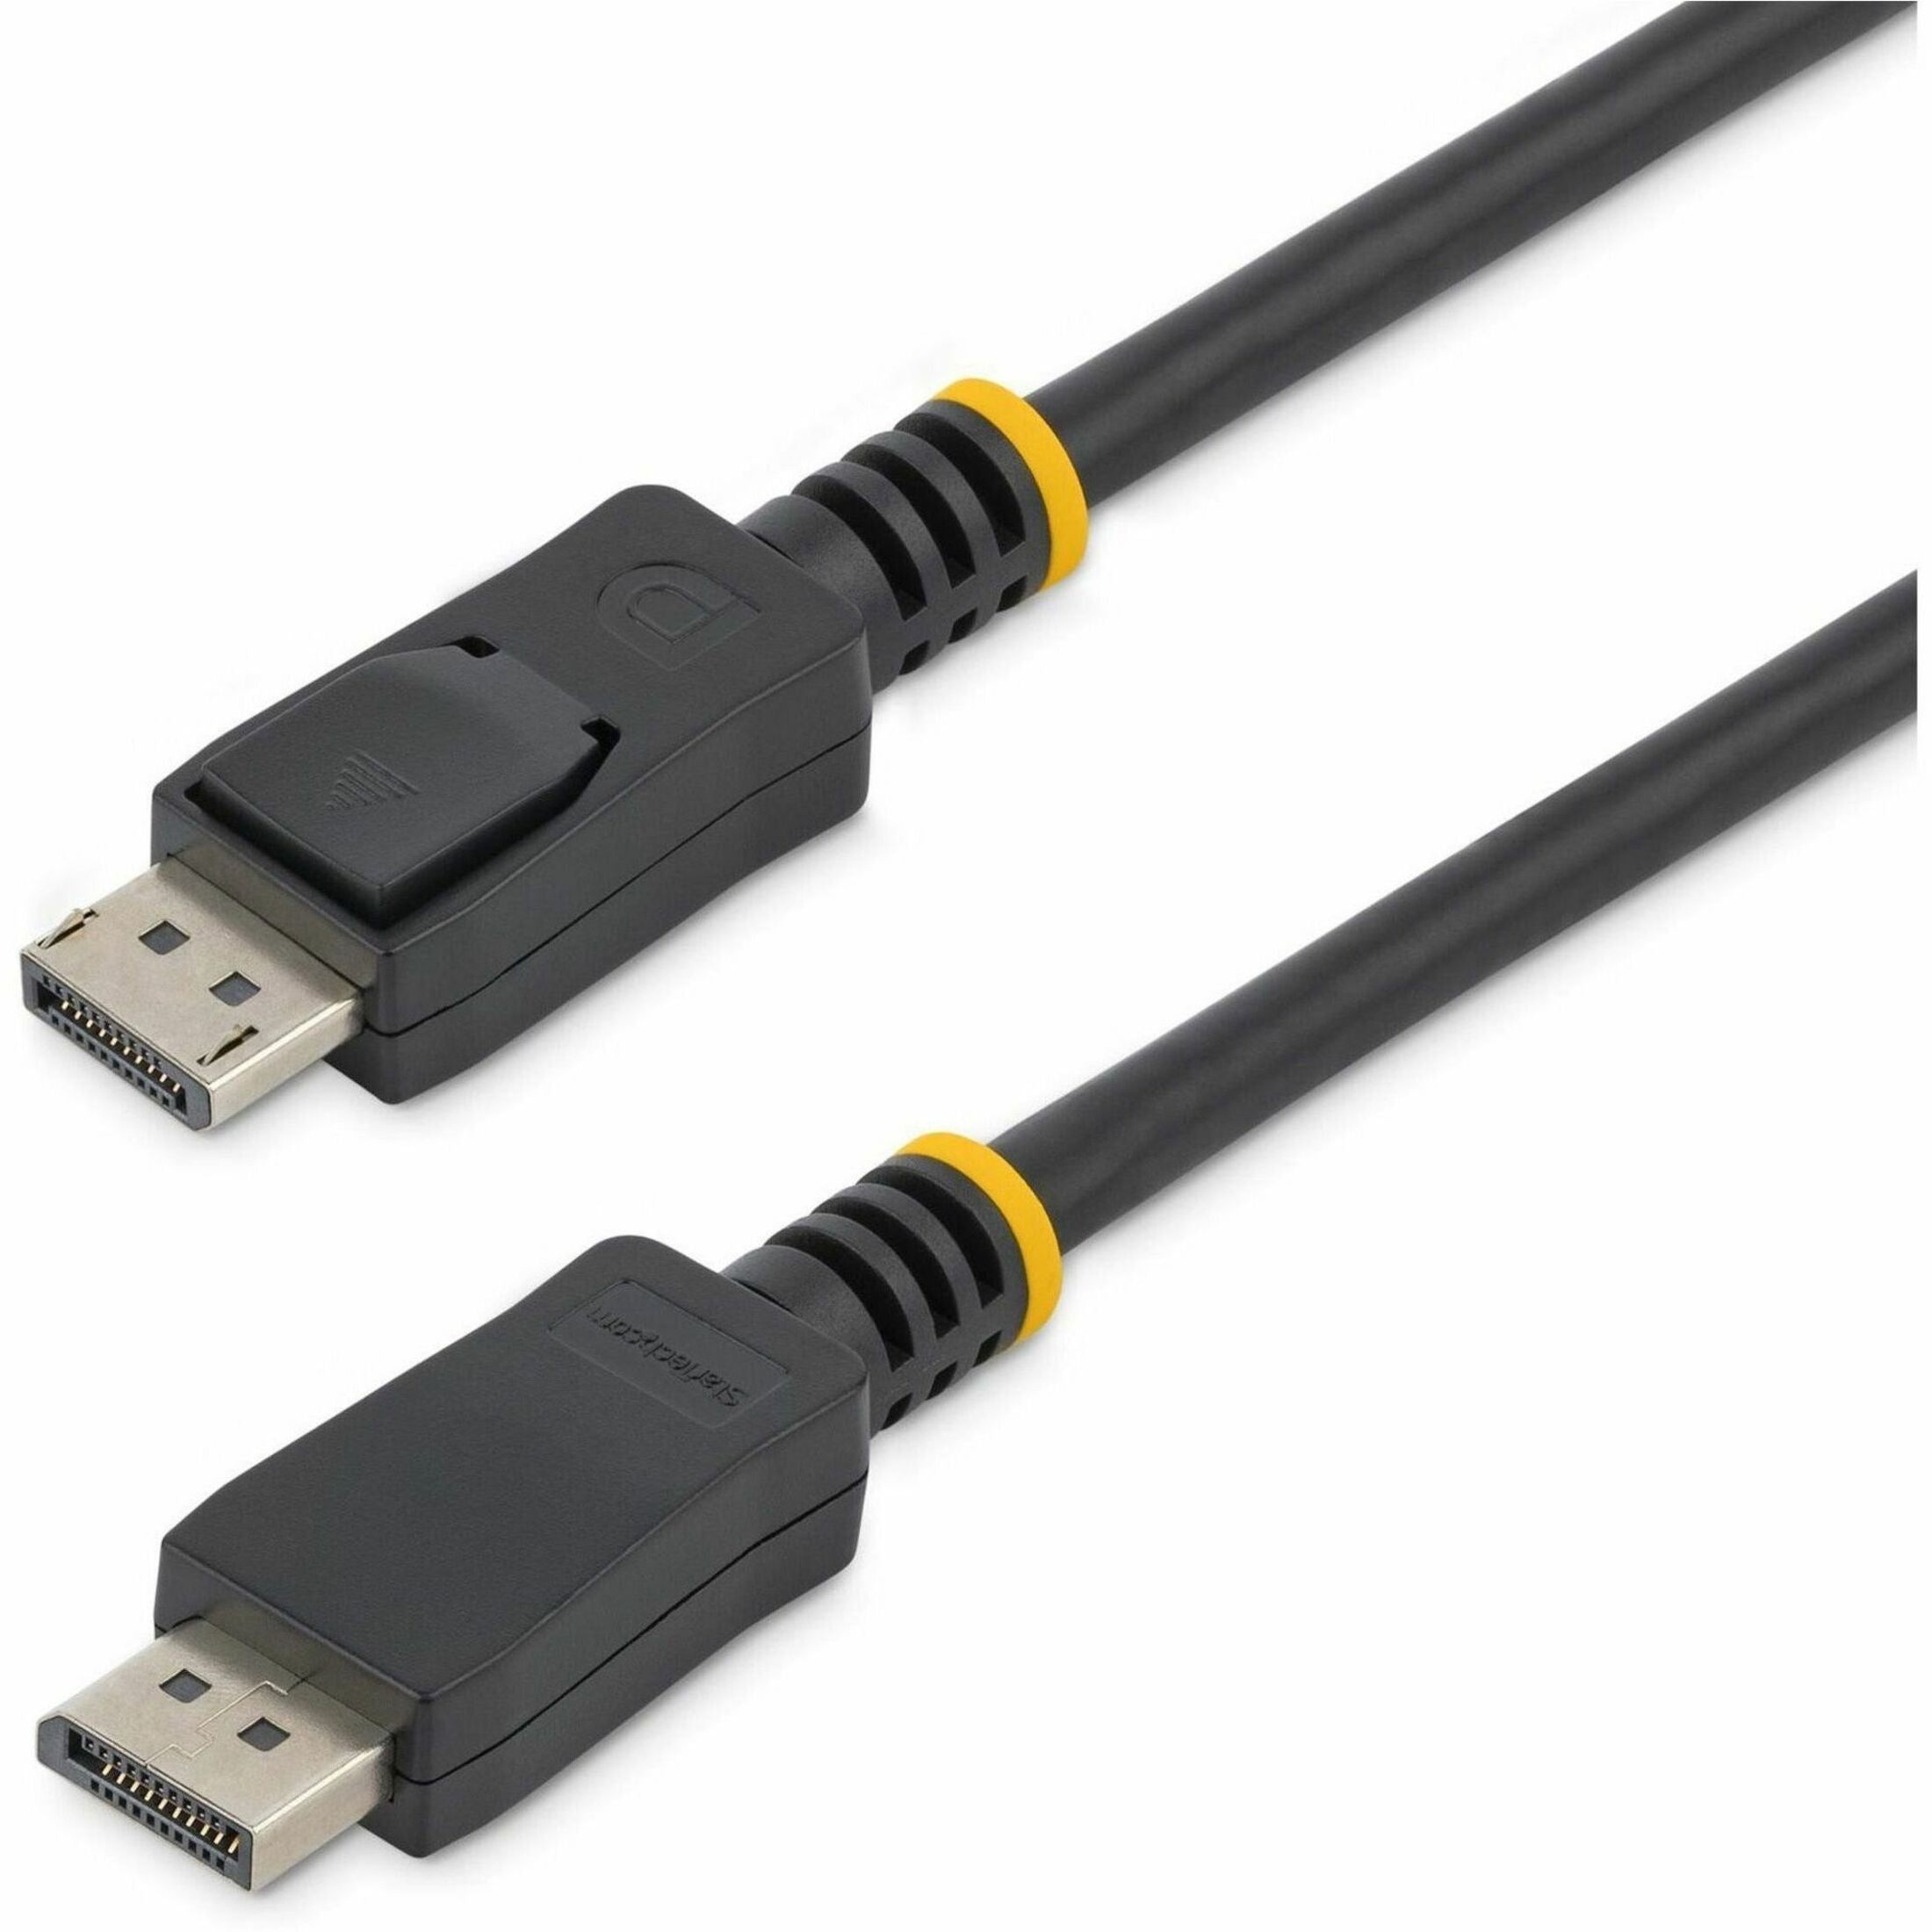 StarTech.com DISPLPORT10L 10 ft Certified DisplayPort 1.2 Cable with Latches M/M - DisplayPort 4k, High-Speed Video Cable for Projectors, Workstations, Notebooks, Monitors, and Audio/Video Devices